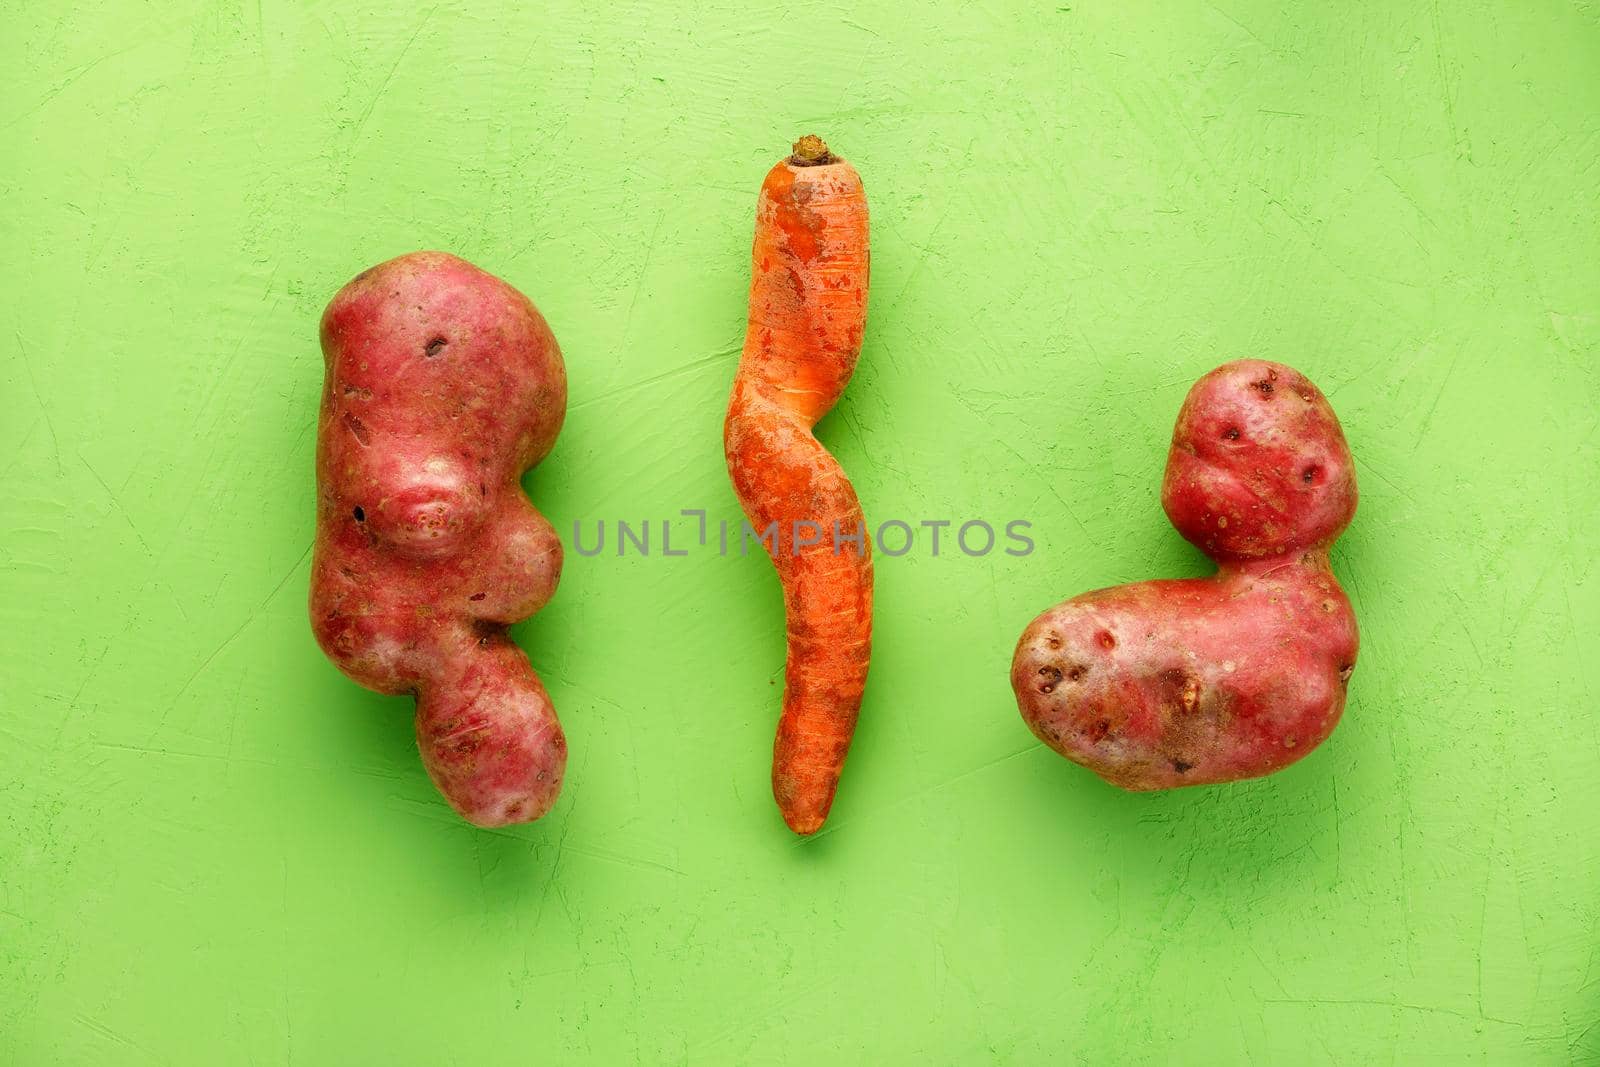 Ugly potatoes and carrots on a green background. Vegetable or food waste concept. Top view, close-up. by Sergii